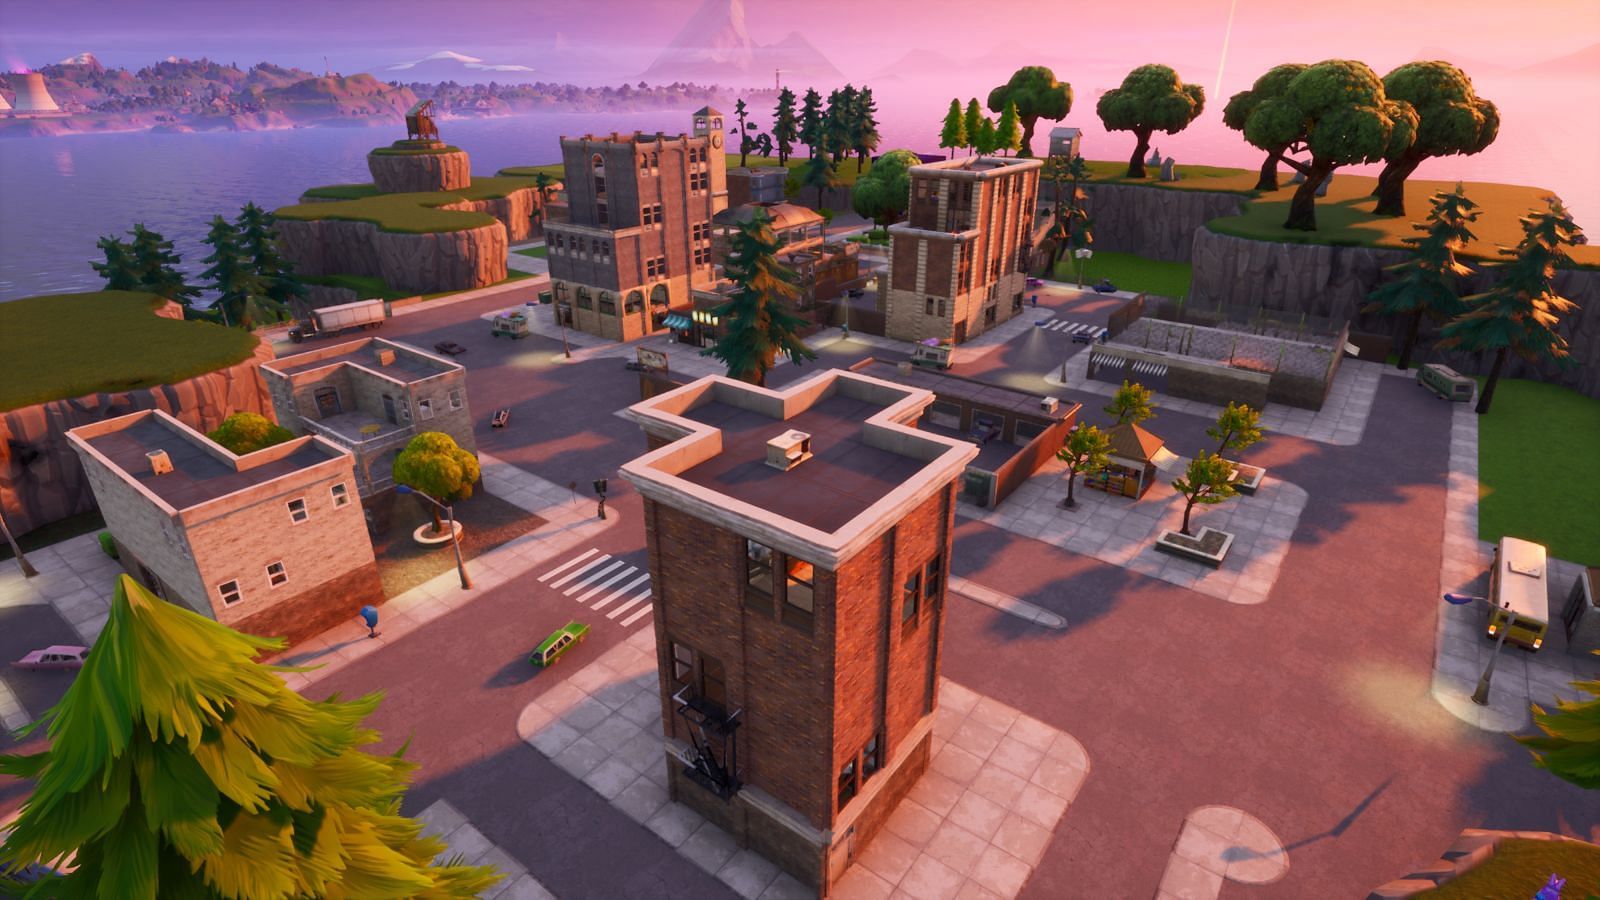 Tilted Towers is back in Fortnite with Chapter 3 Season 1 (Image via Epic Games)